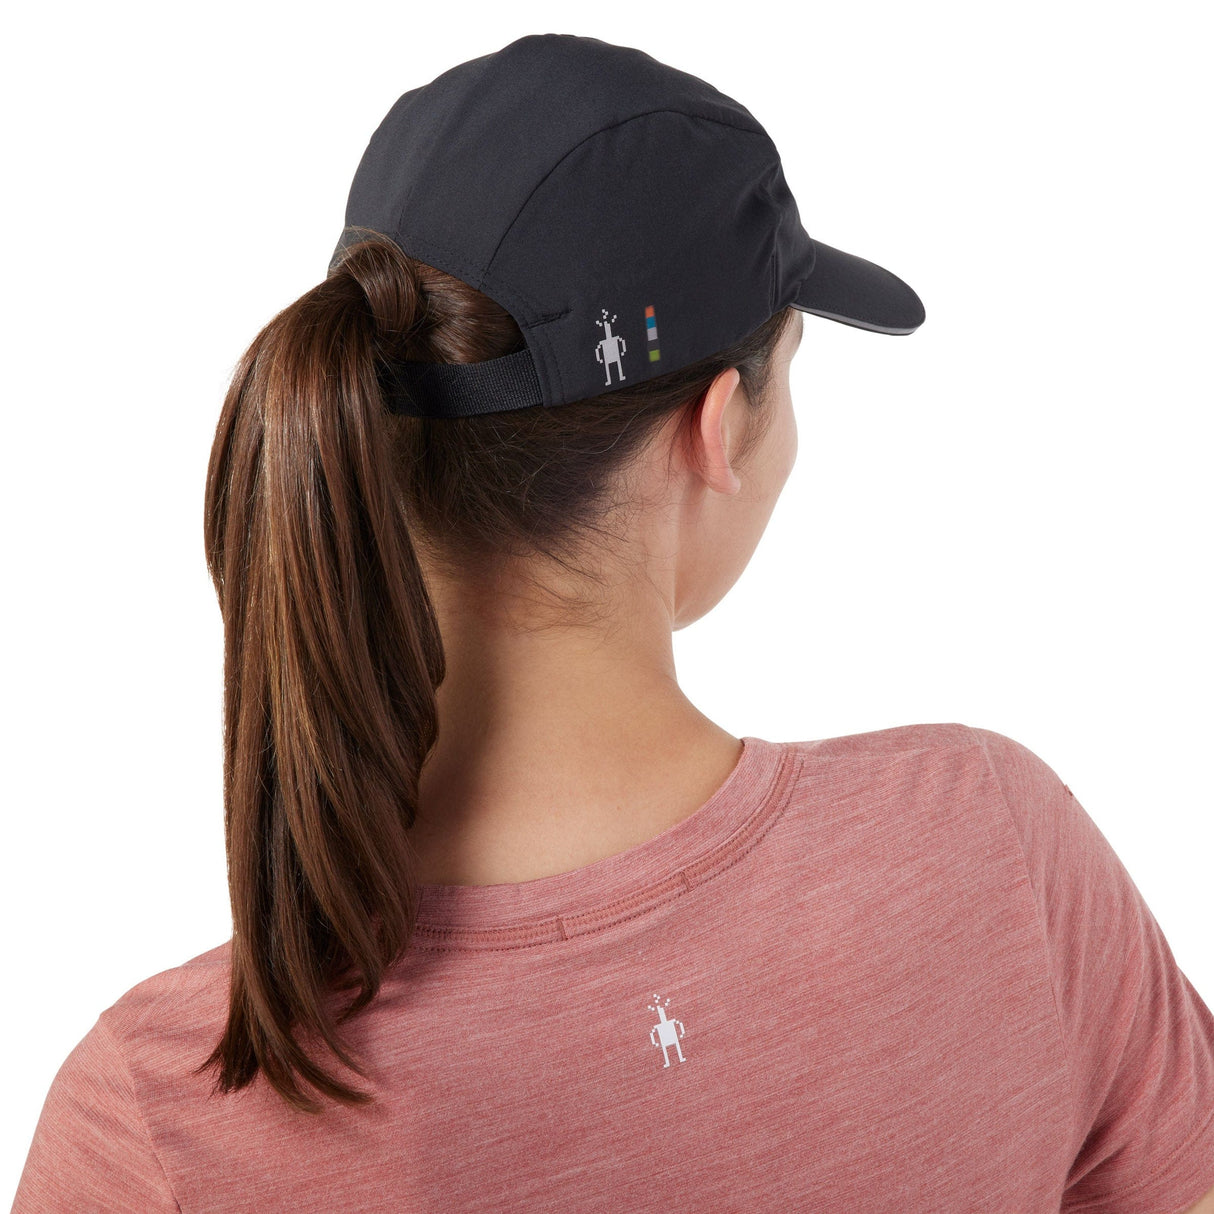 Smartwool Go Far, Feel Good Runners Cap  -  One Size Fits Most / Black